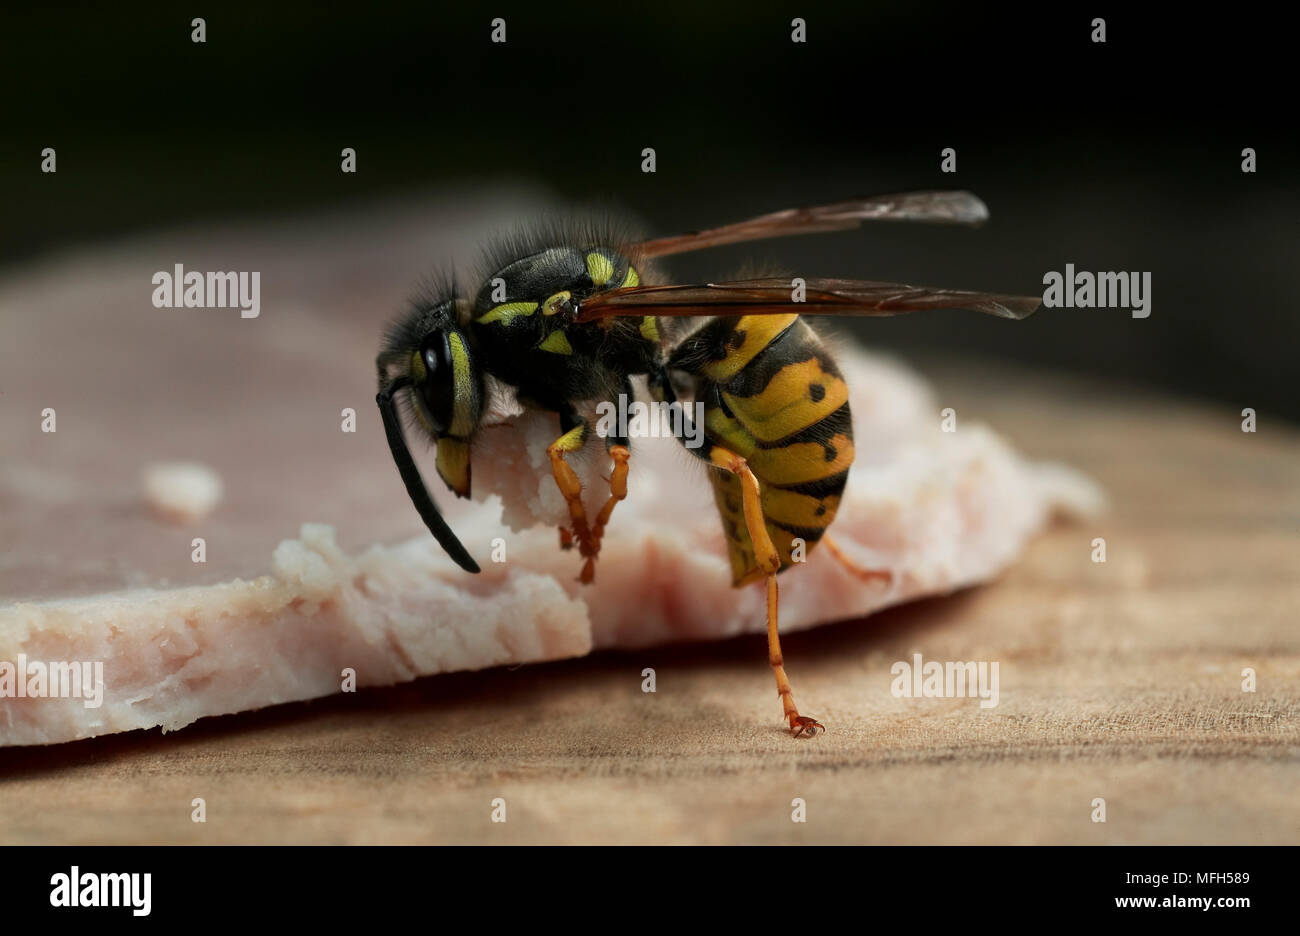 COMMON WASP  Vespa vulgaris About to take off with morsel of ham Stock Photo